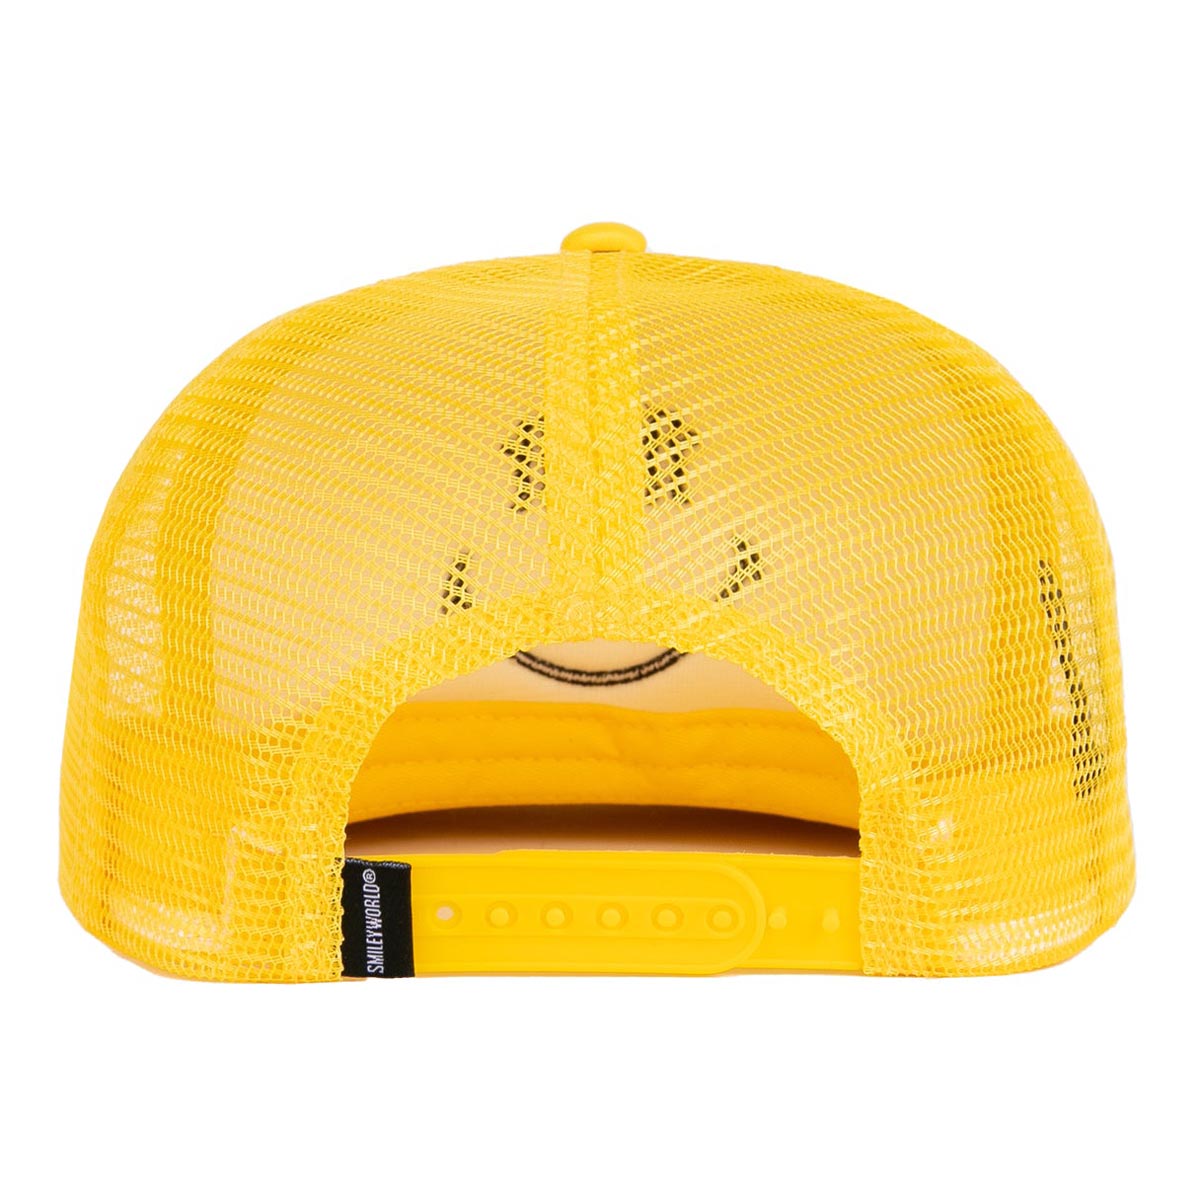 Grizzly x Smiley World Big Smile Trucker Snapback Hat - Yellow image 3